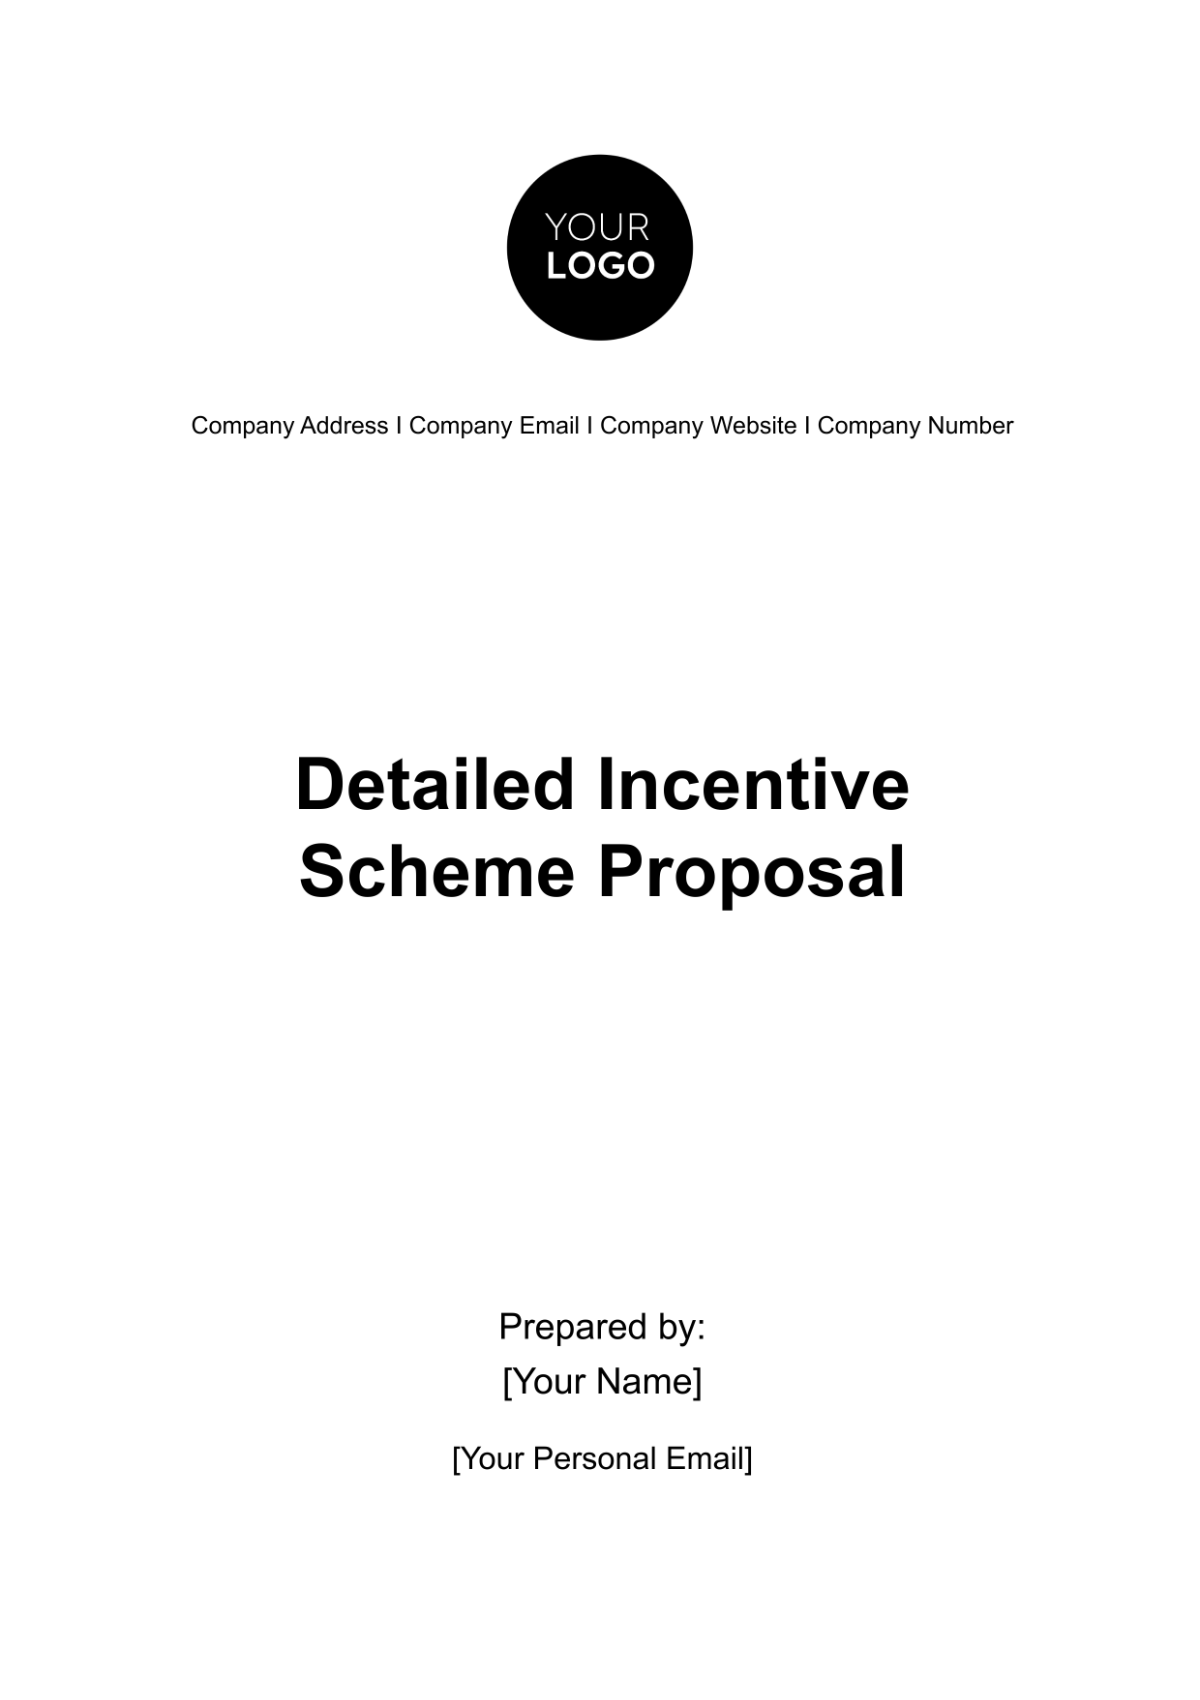 Free Detailed Incentive Scheme Proposal HR Template